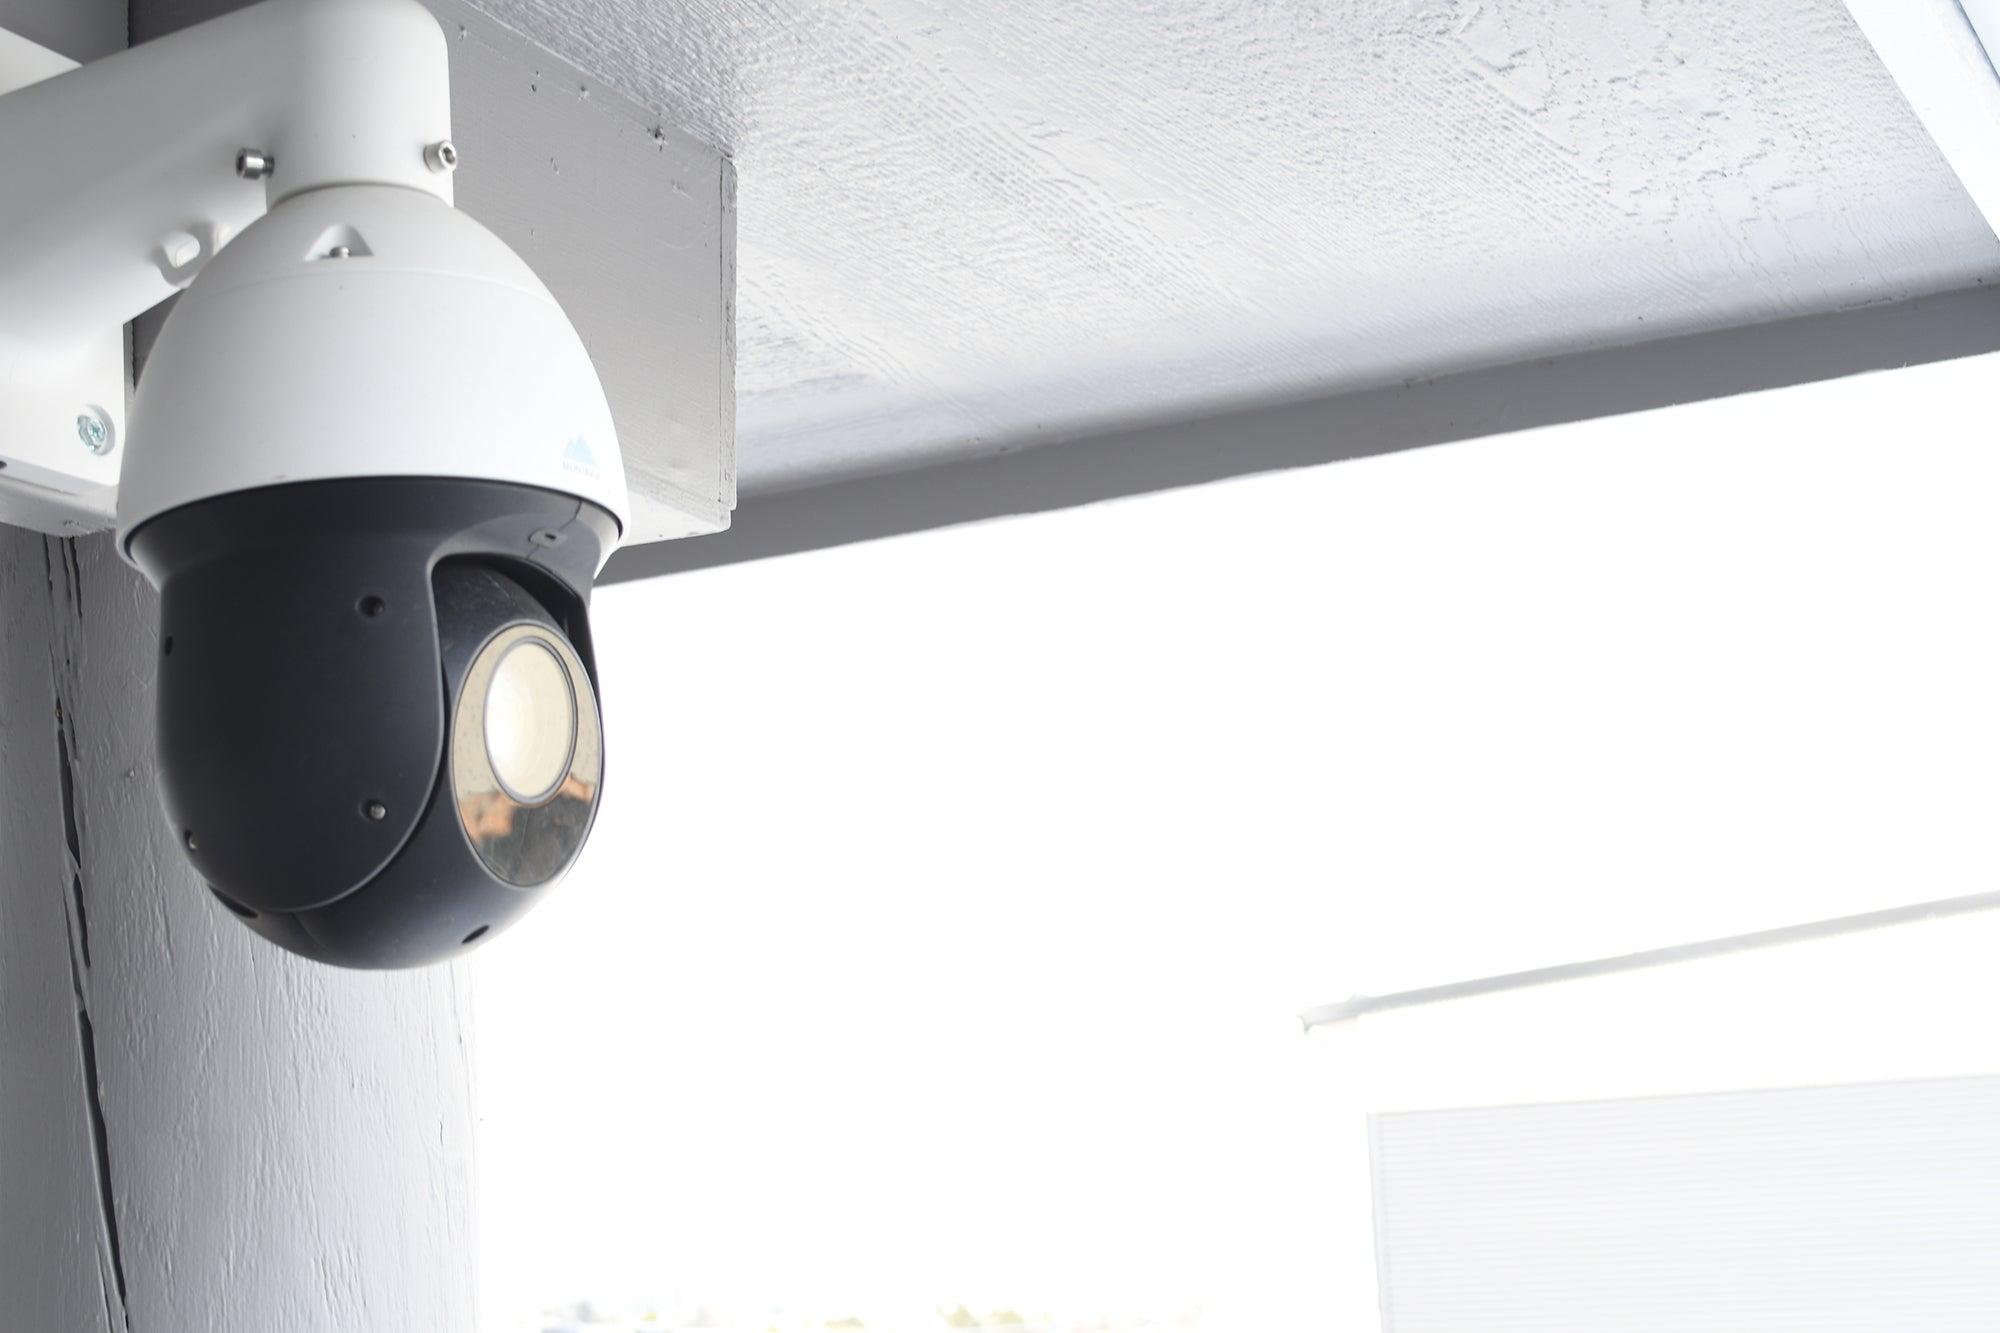 These battery-powered security cameras keep watch without the